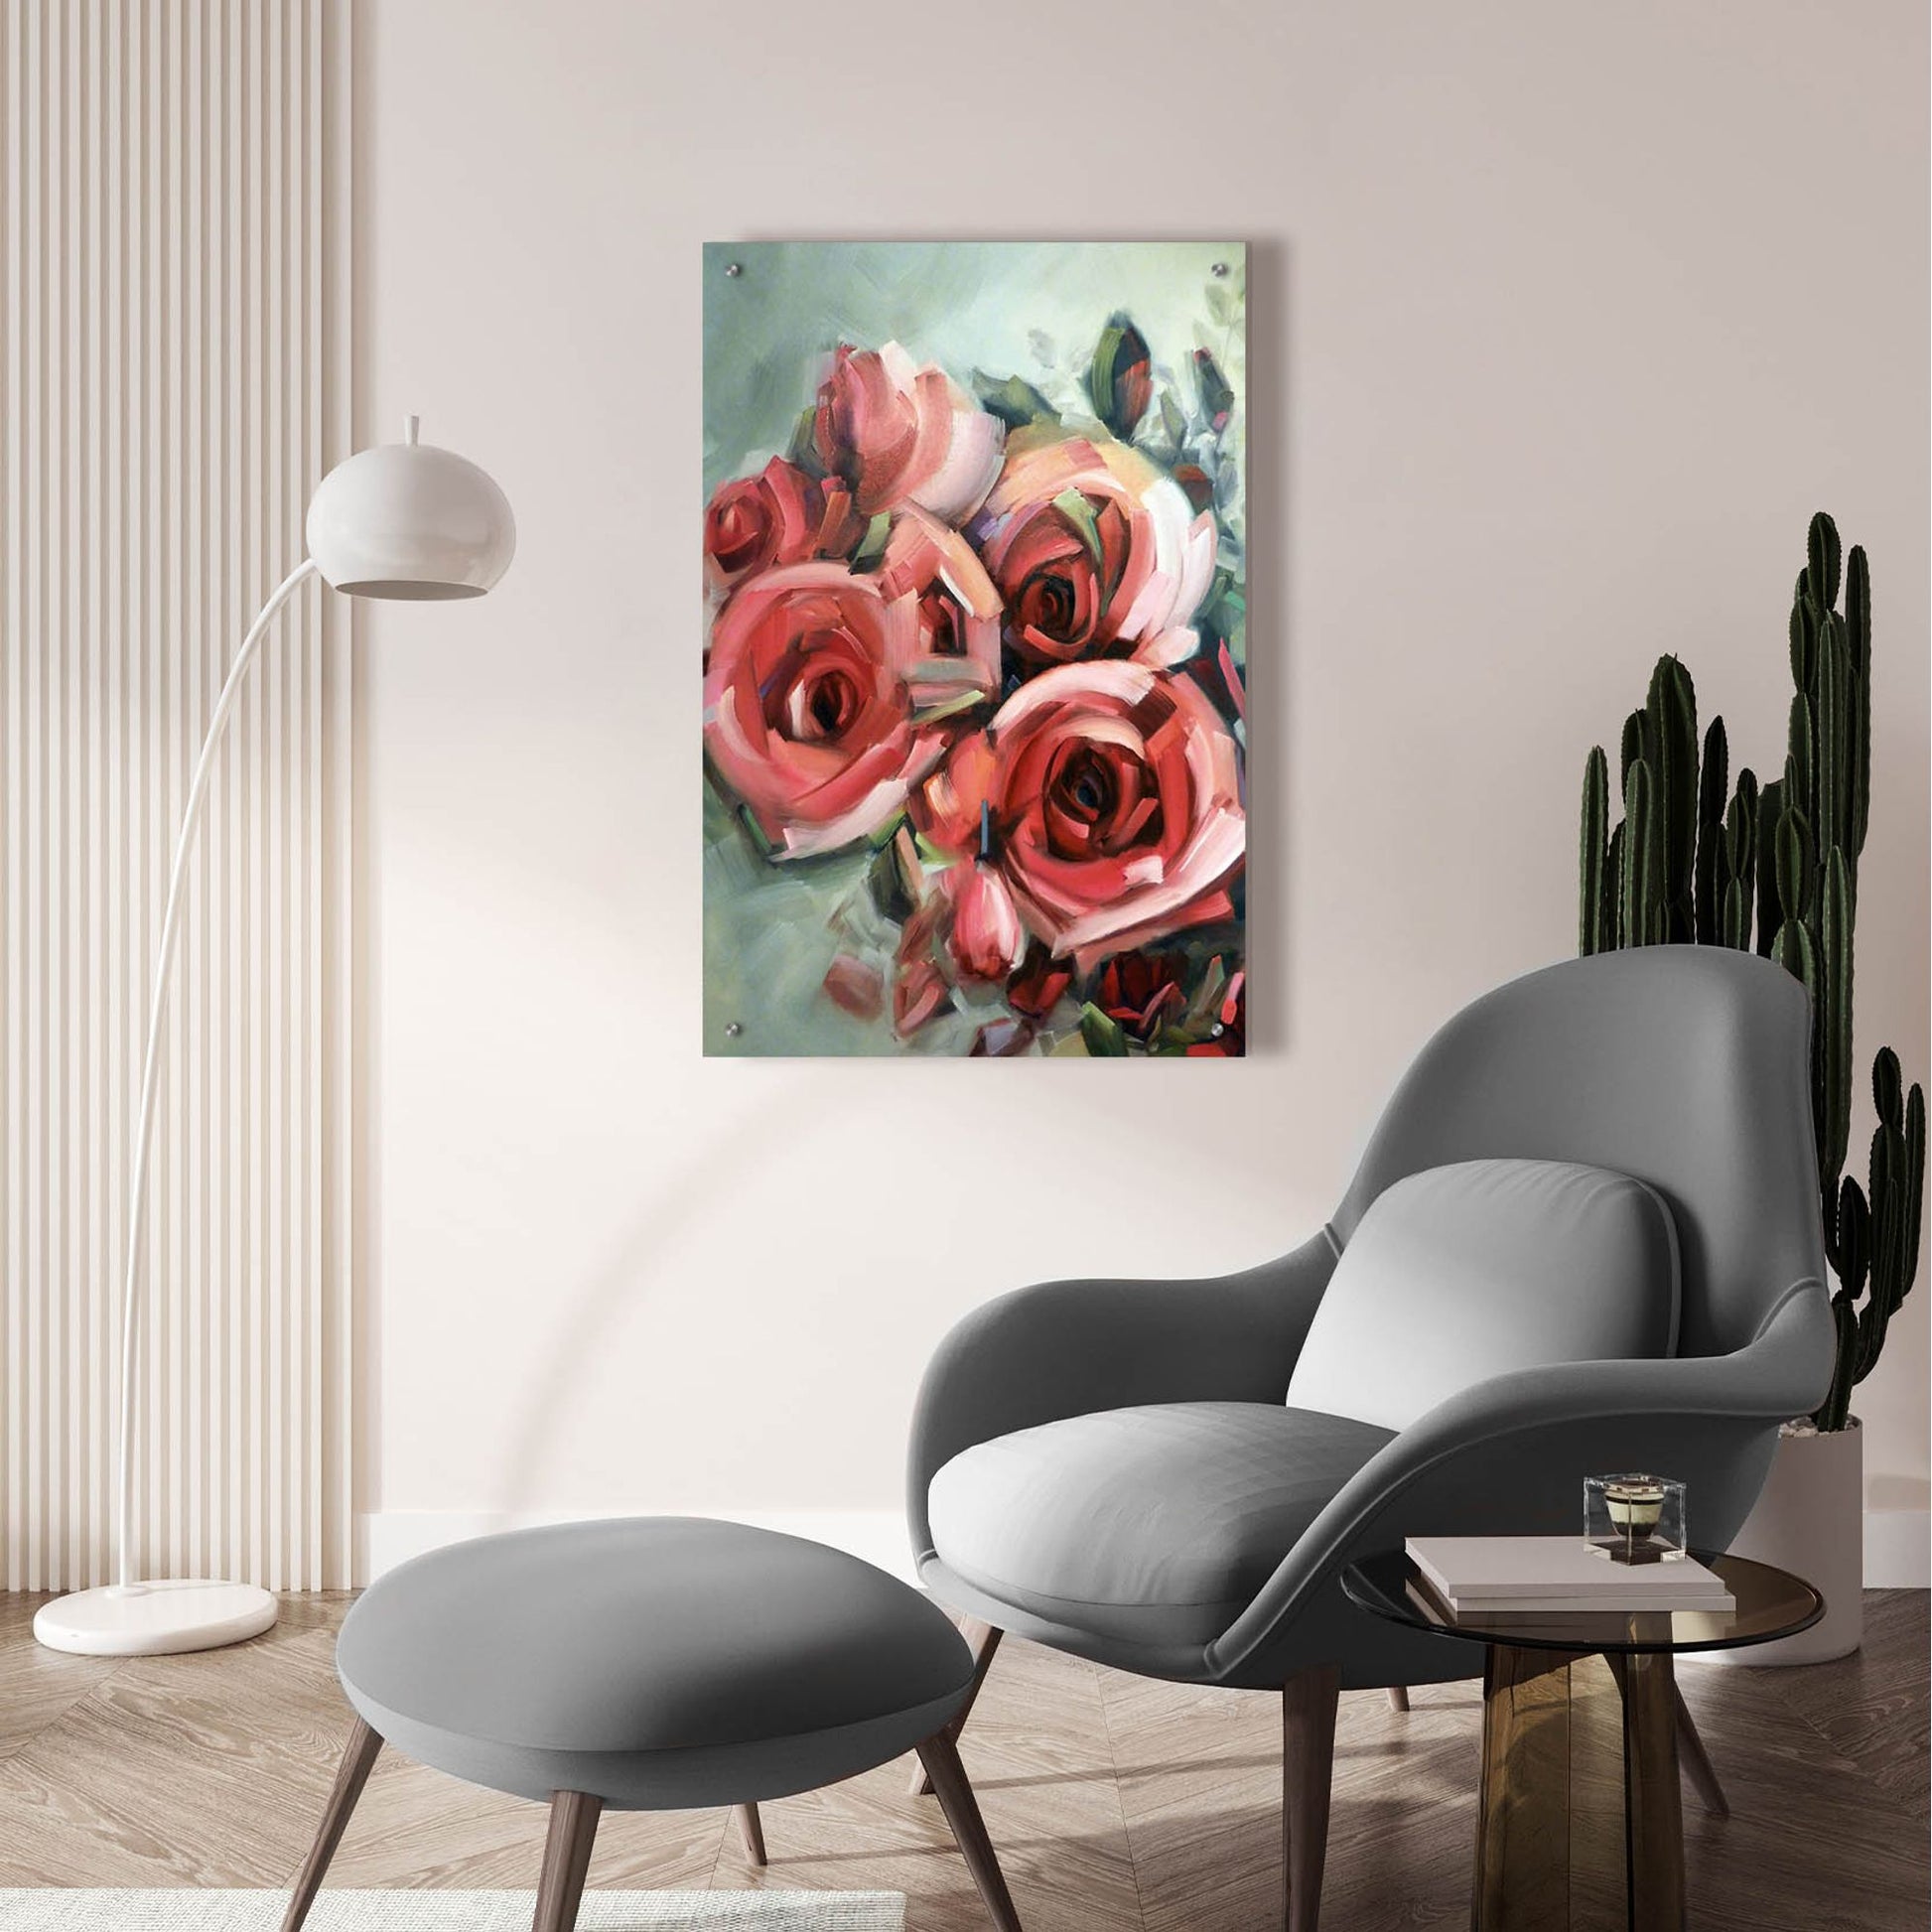 Epic Art 'Amid Scent Of Roses' by Holly Van Hart, Acrylic Glass Wall Art,24x36